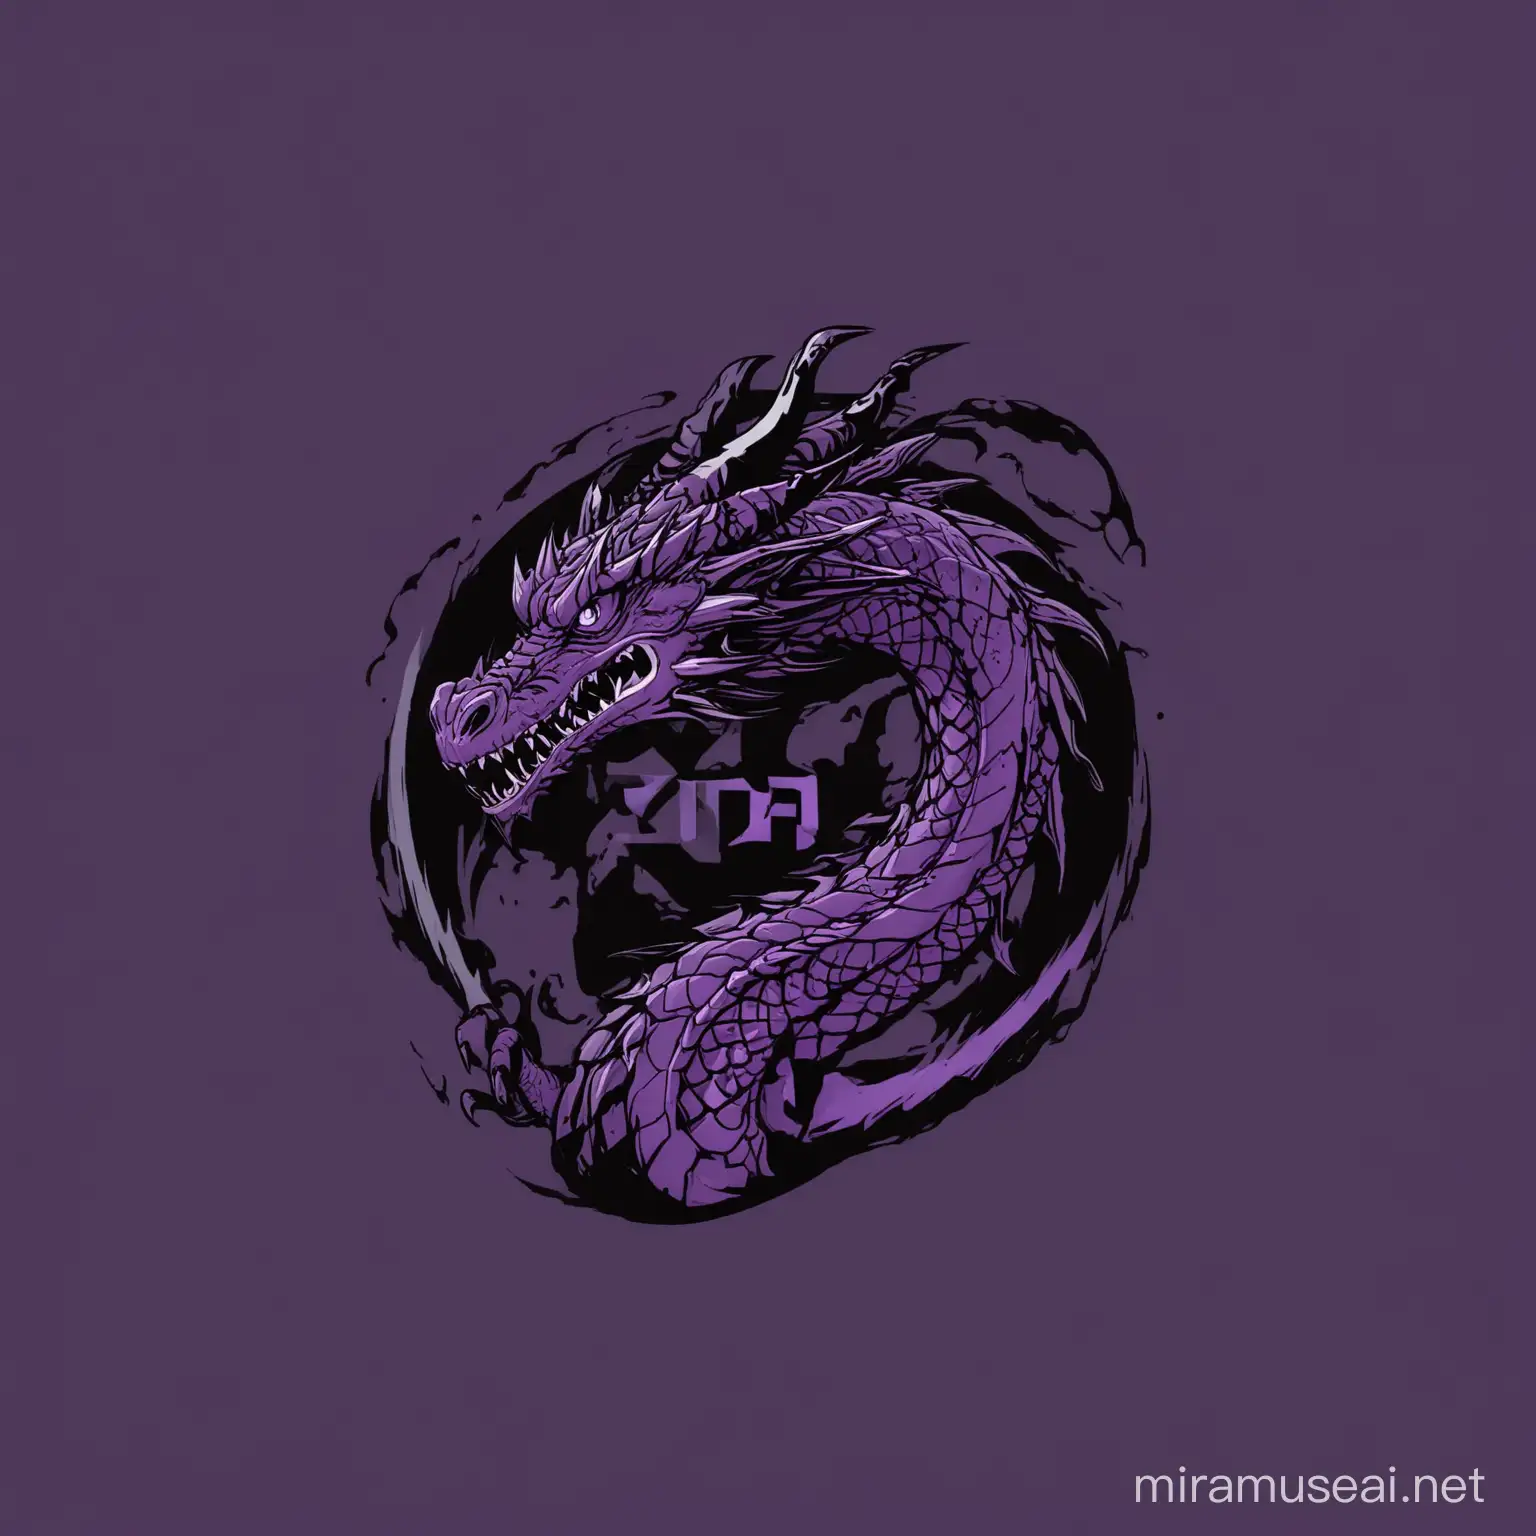 Dragonthemed Logo for YouTube Channel with Purple and Black Tones